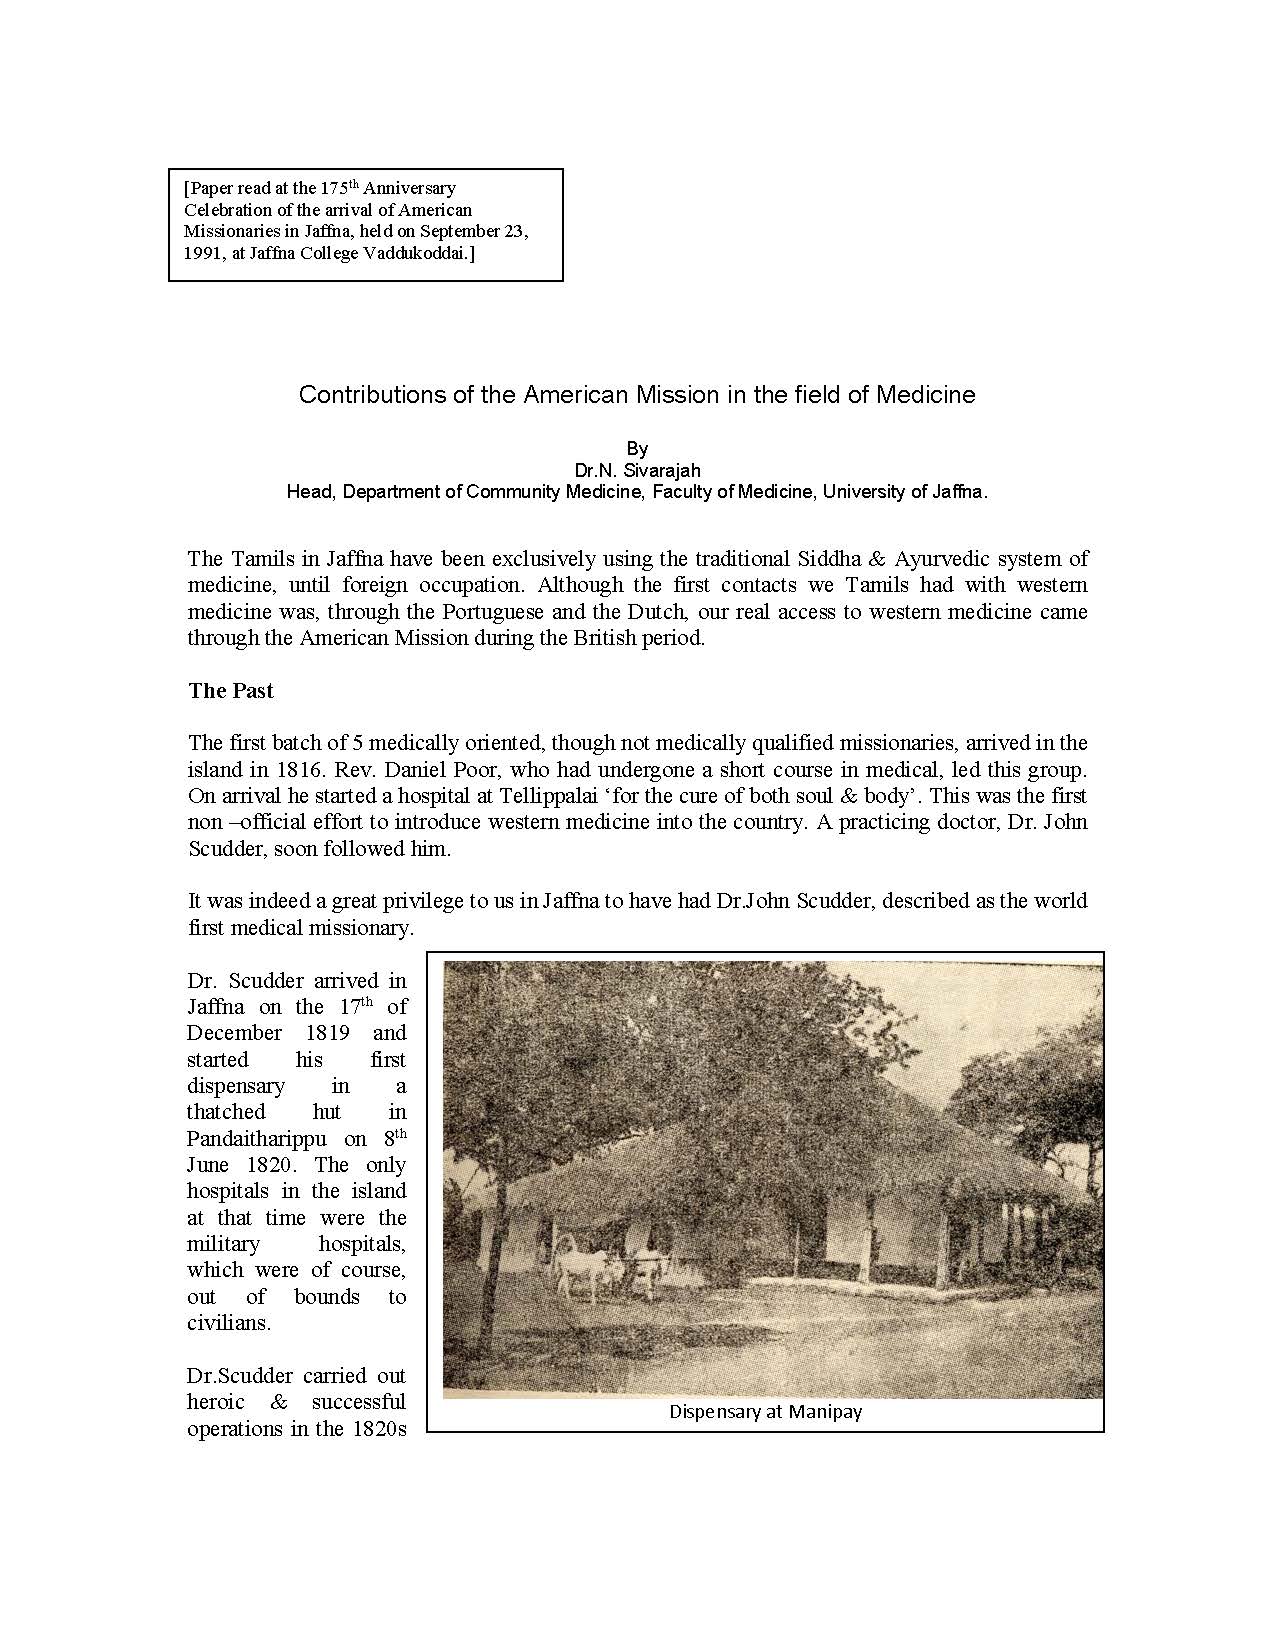 1991-contributions-of-the-american-mission-in-the-field-of-medicinep3_page_1